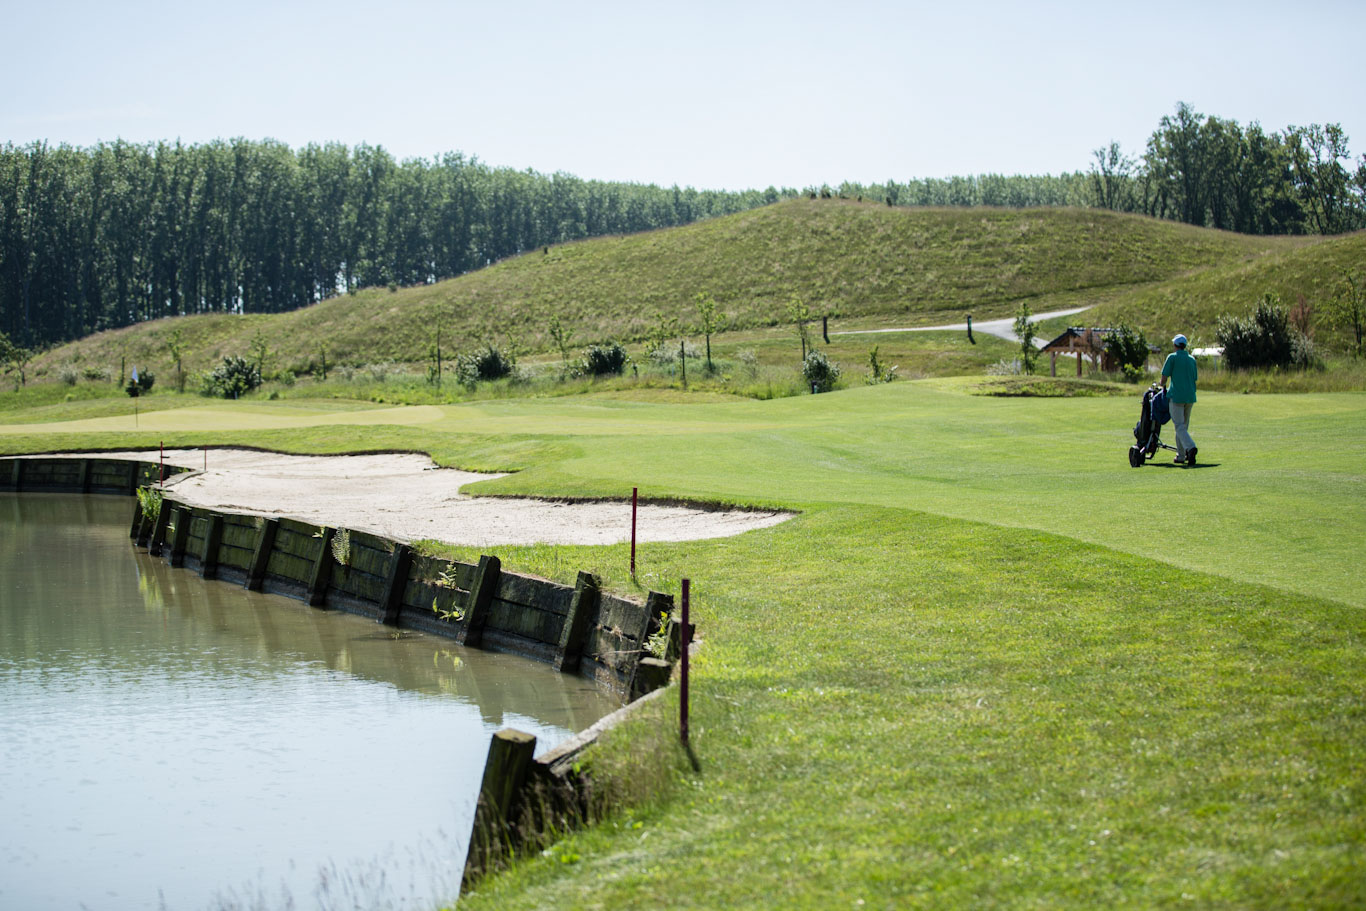 Along the fairway at Merignies Golf Club, Lille, France